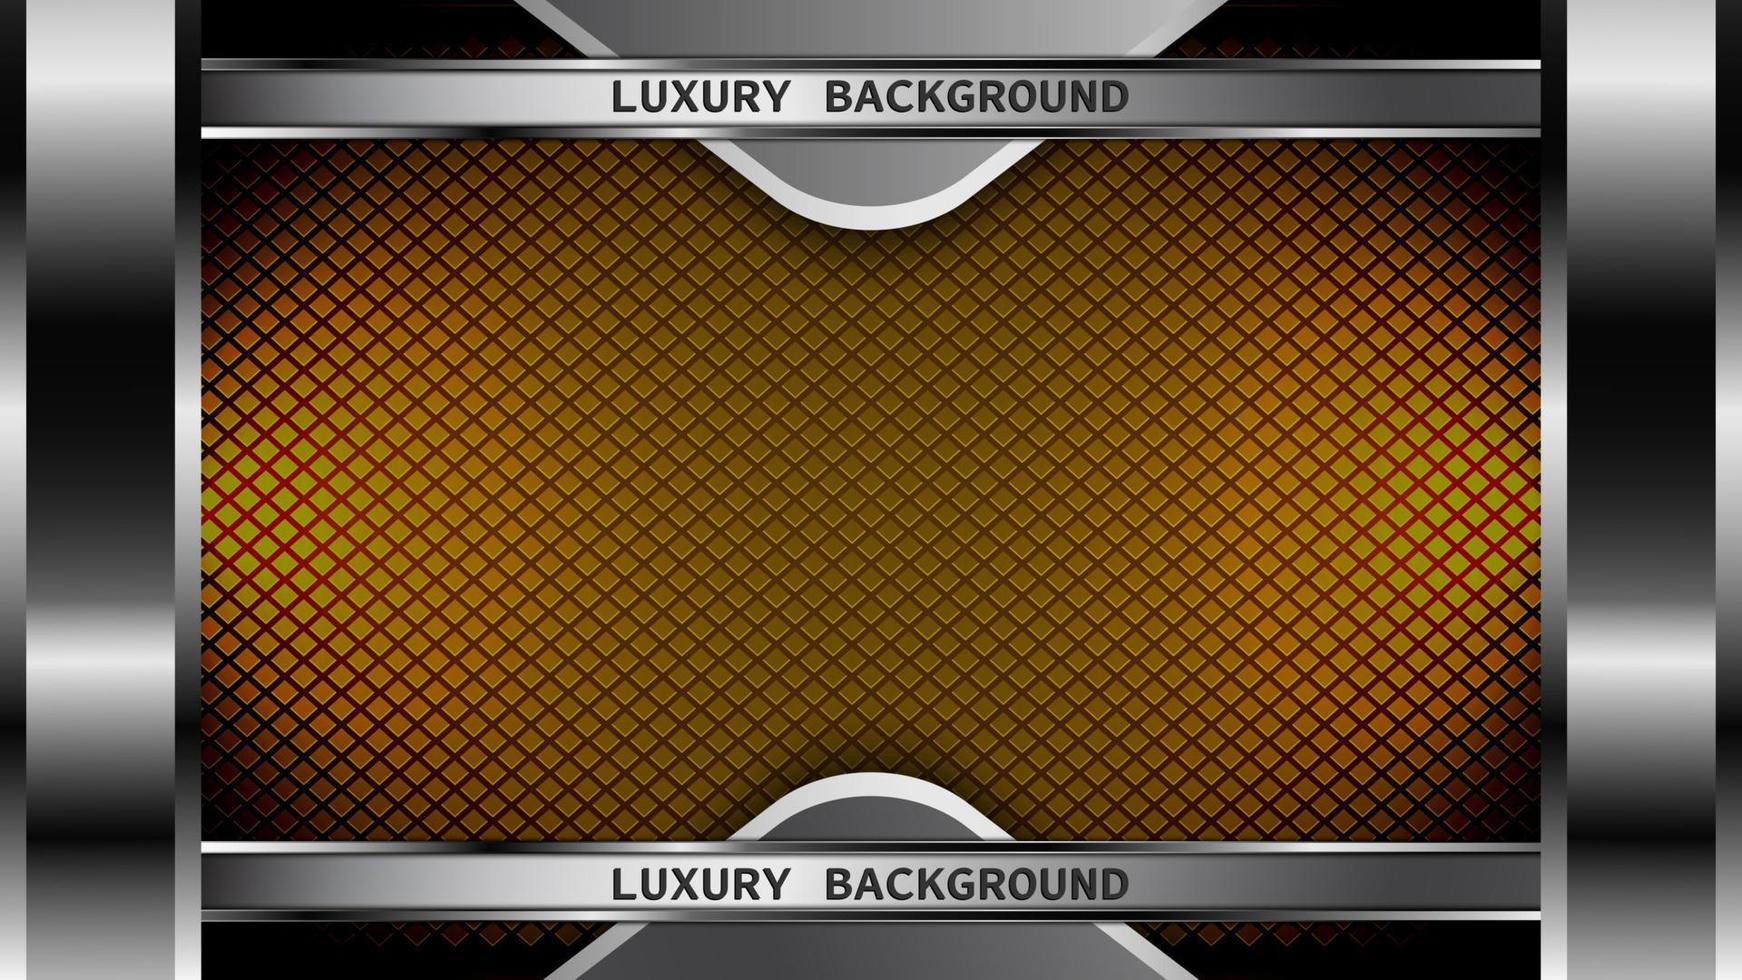 shiny silver background, frame design and texture pattern, with orange neon lights vector